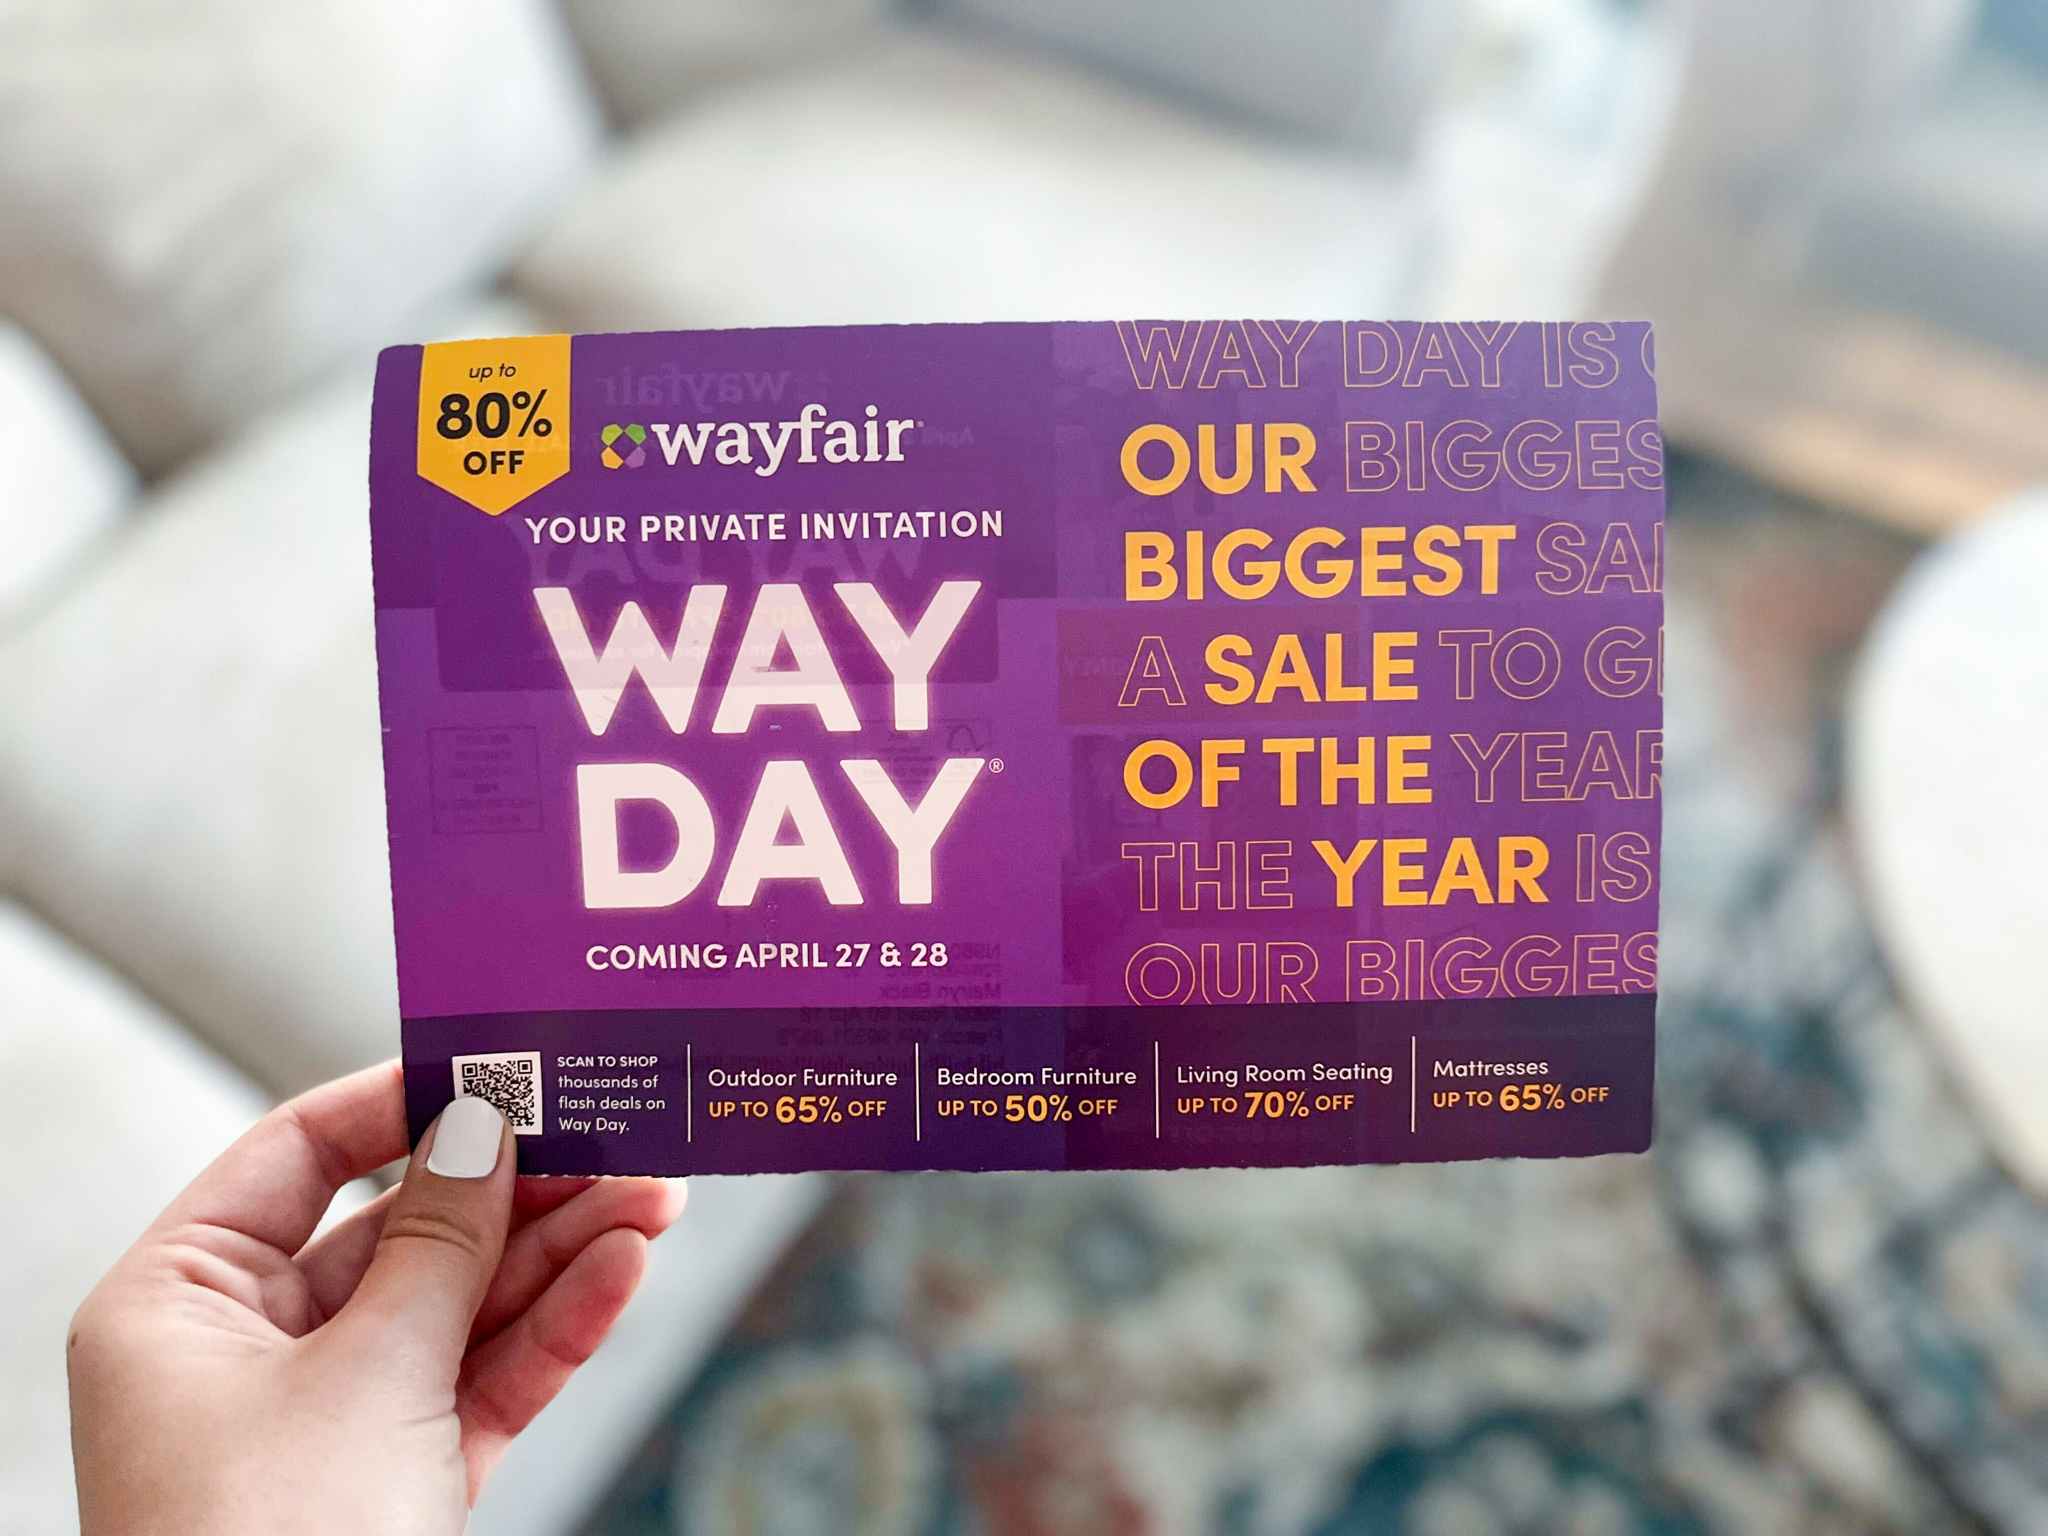 hand holding a private invitation mail flyer for the Wayfair Way Day sale event